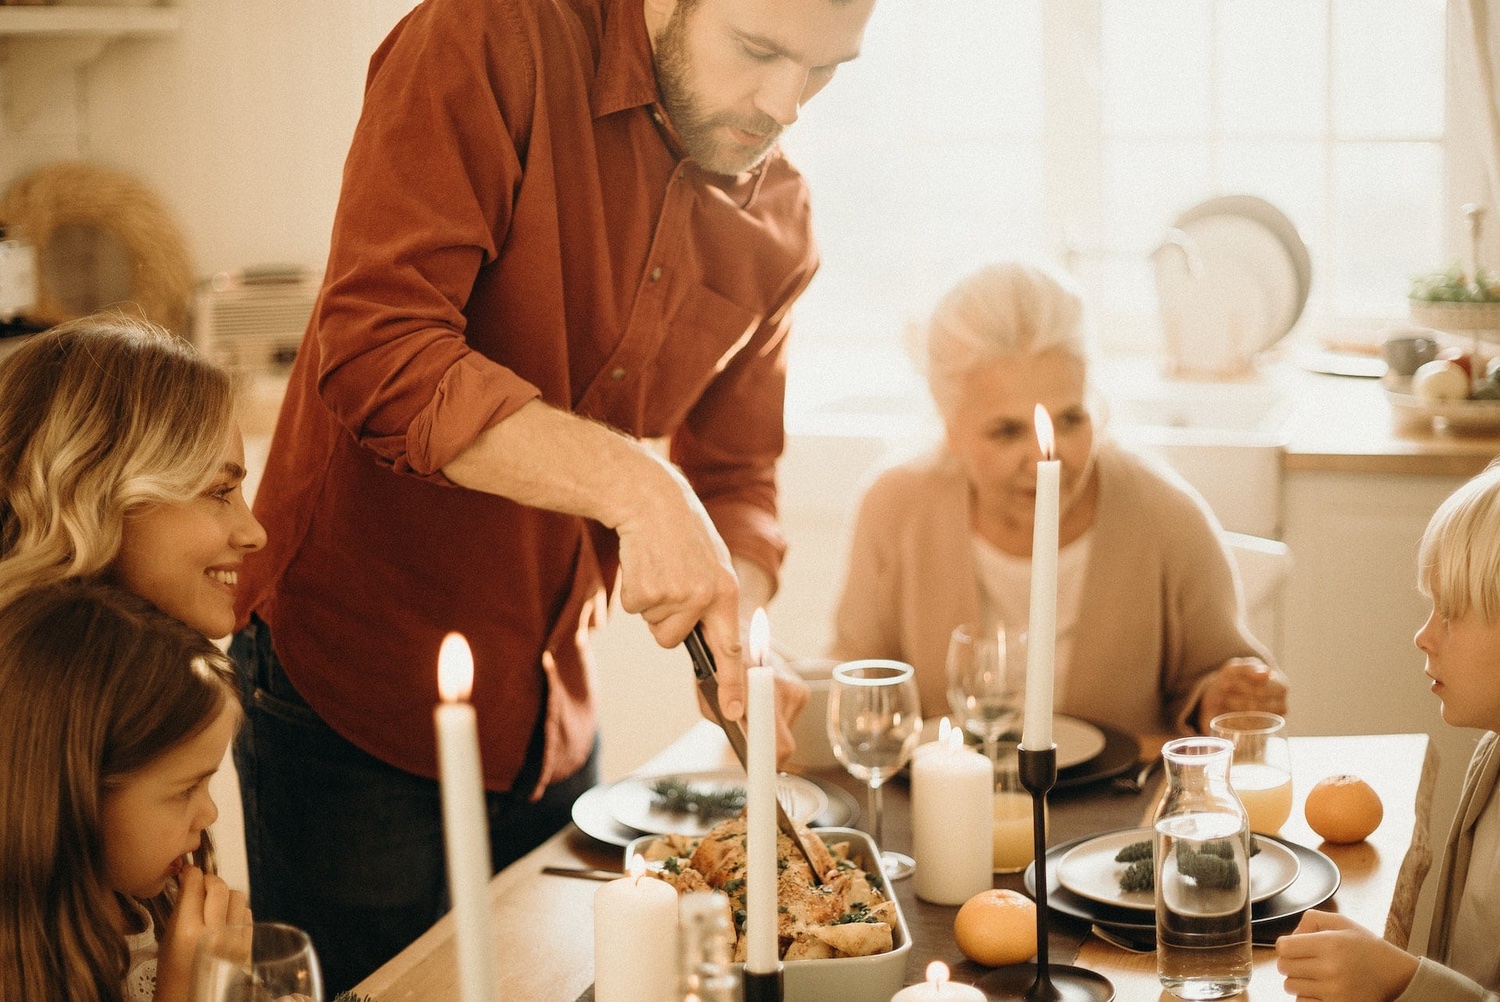 6 tips to control your glucose at Thanksgiving